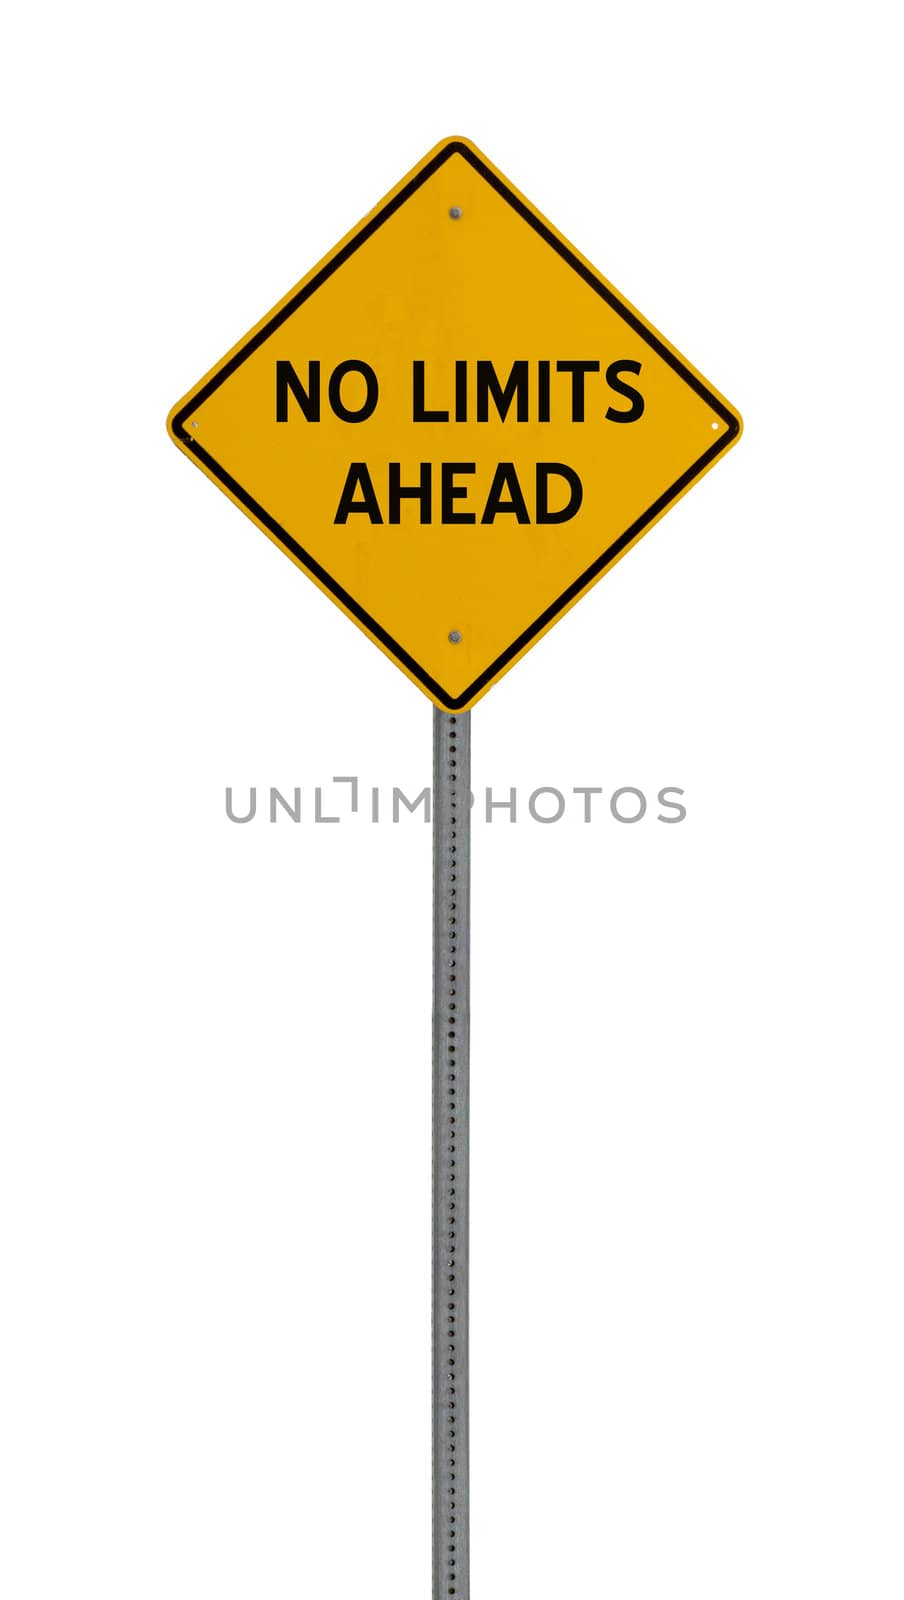 no limits ahead - Yellow road warning sign by jeremywhat